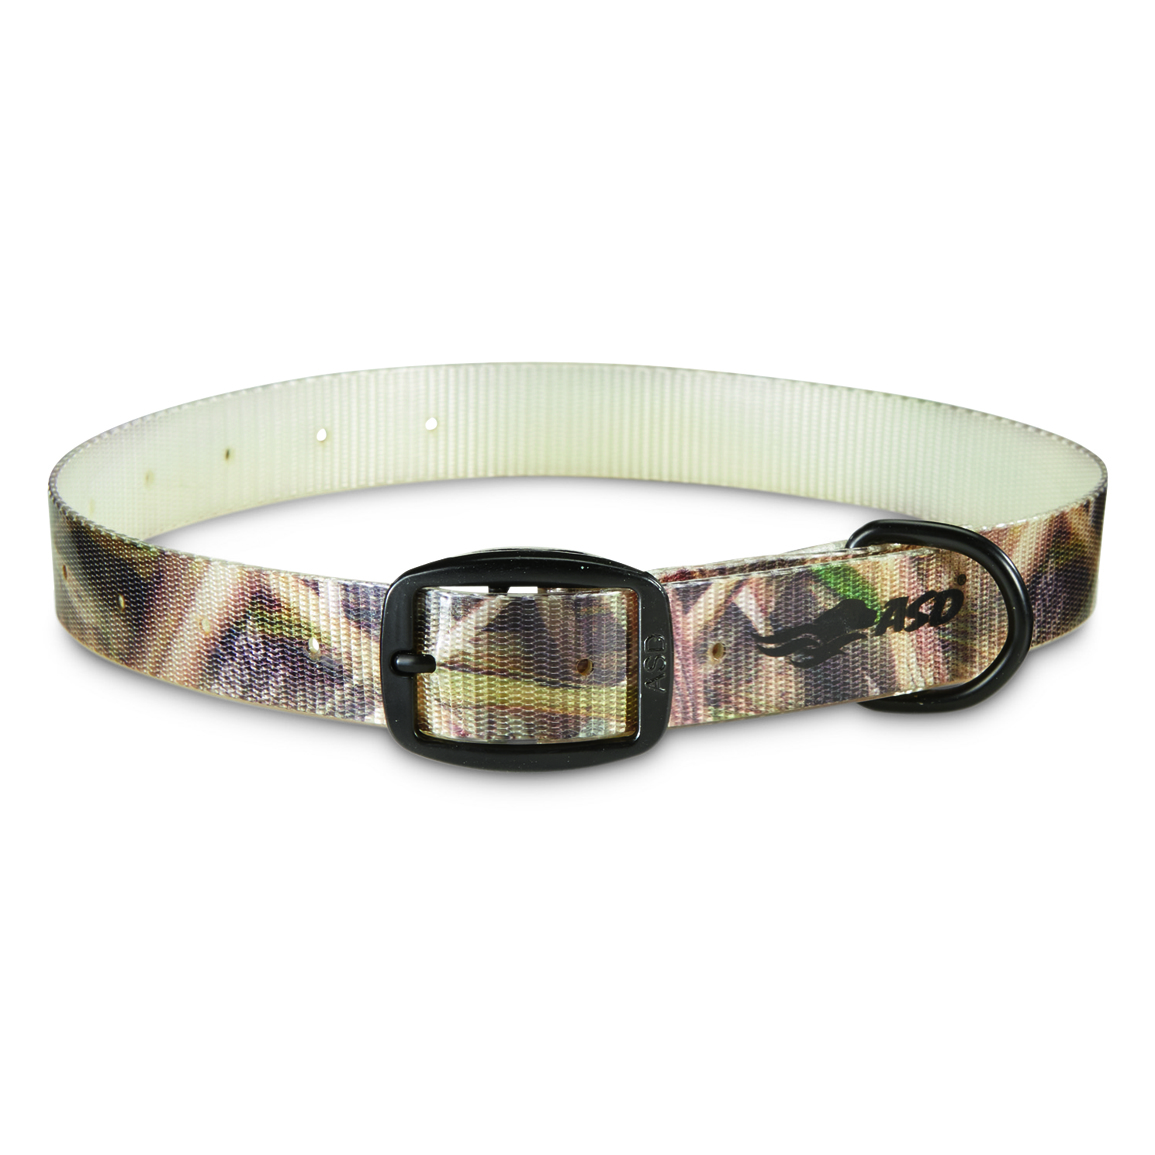 Avery GHG Cut-To-Fit Collar, Camo